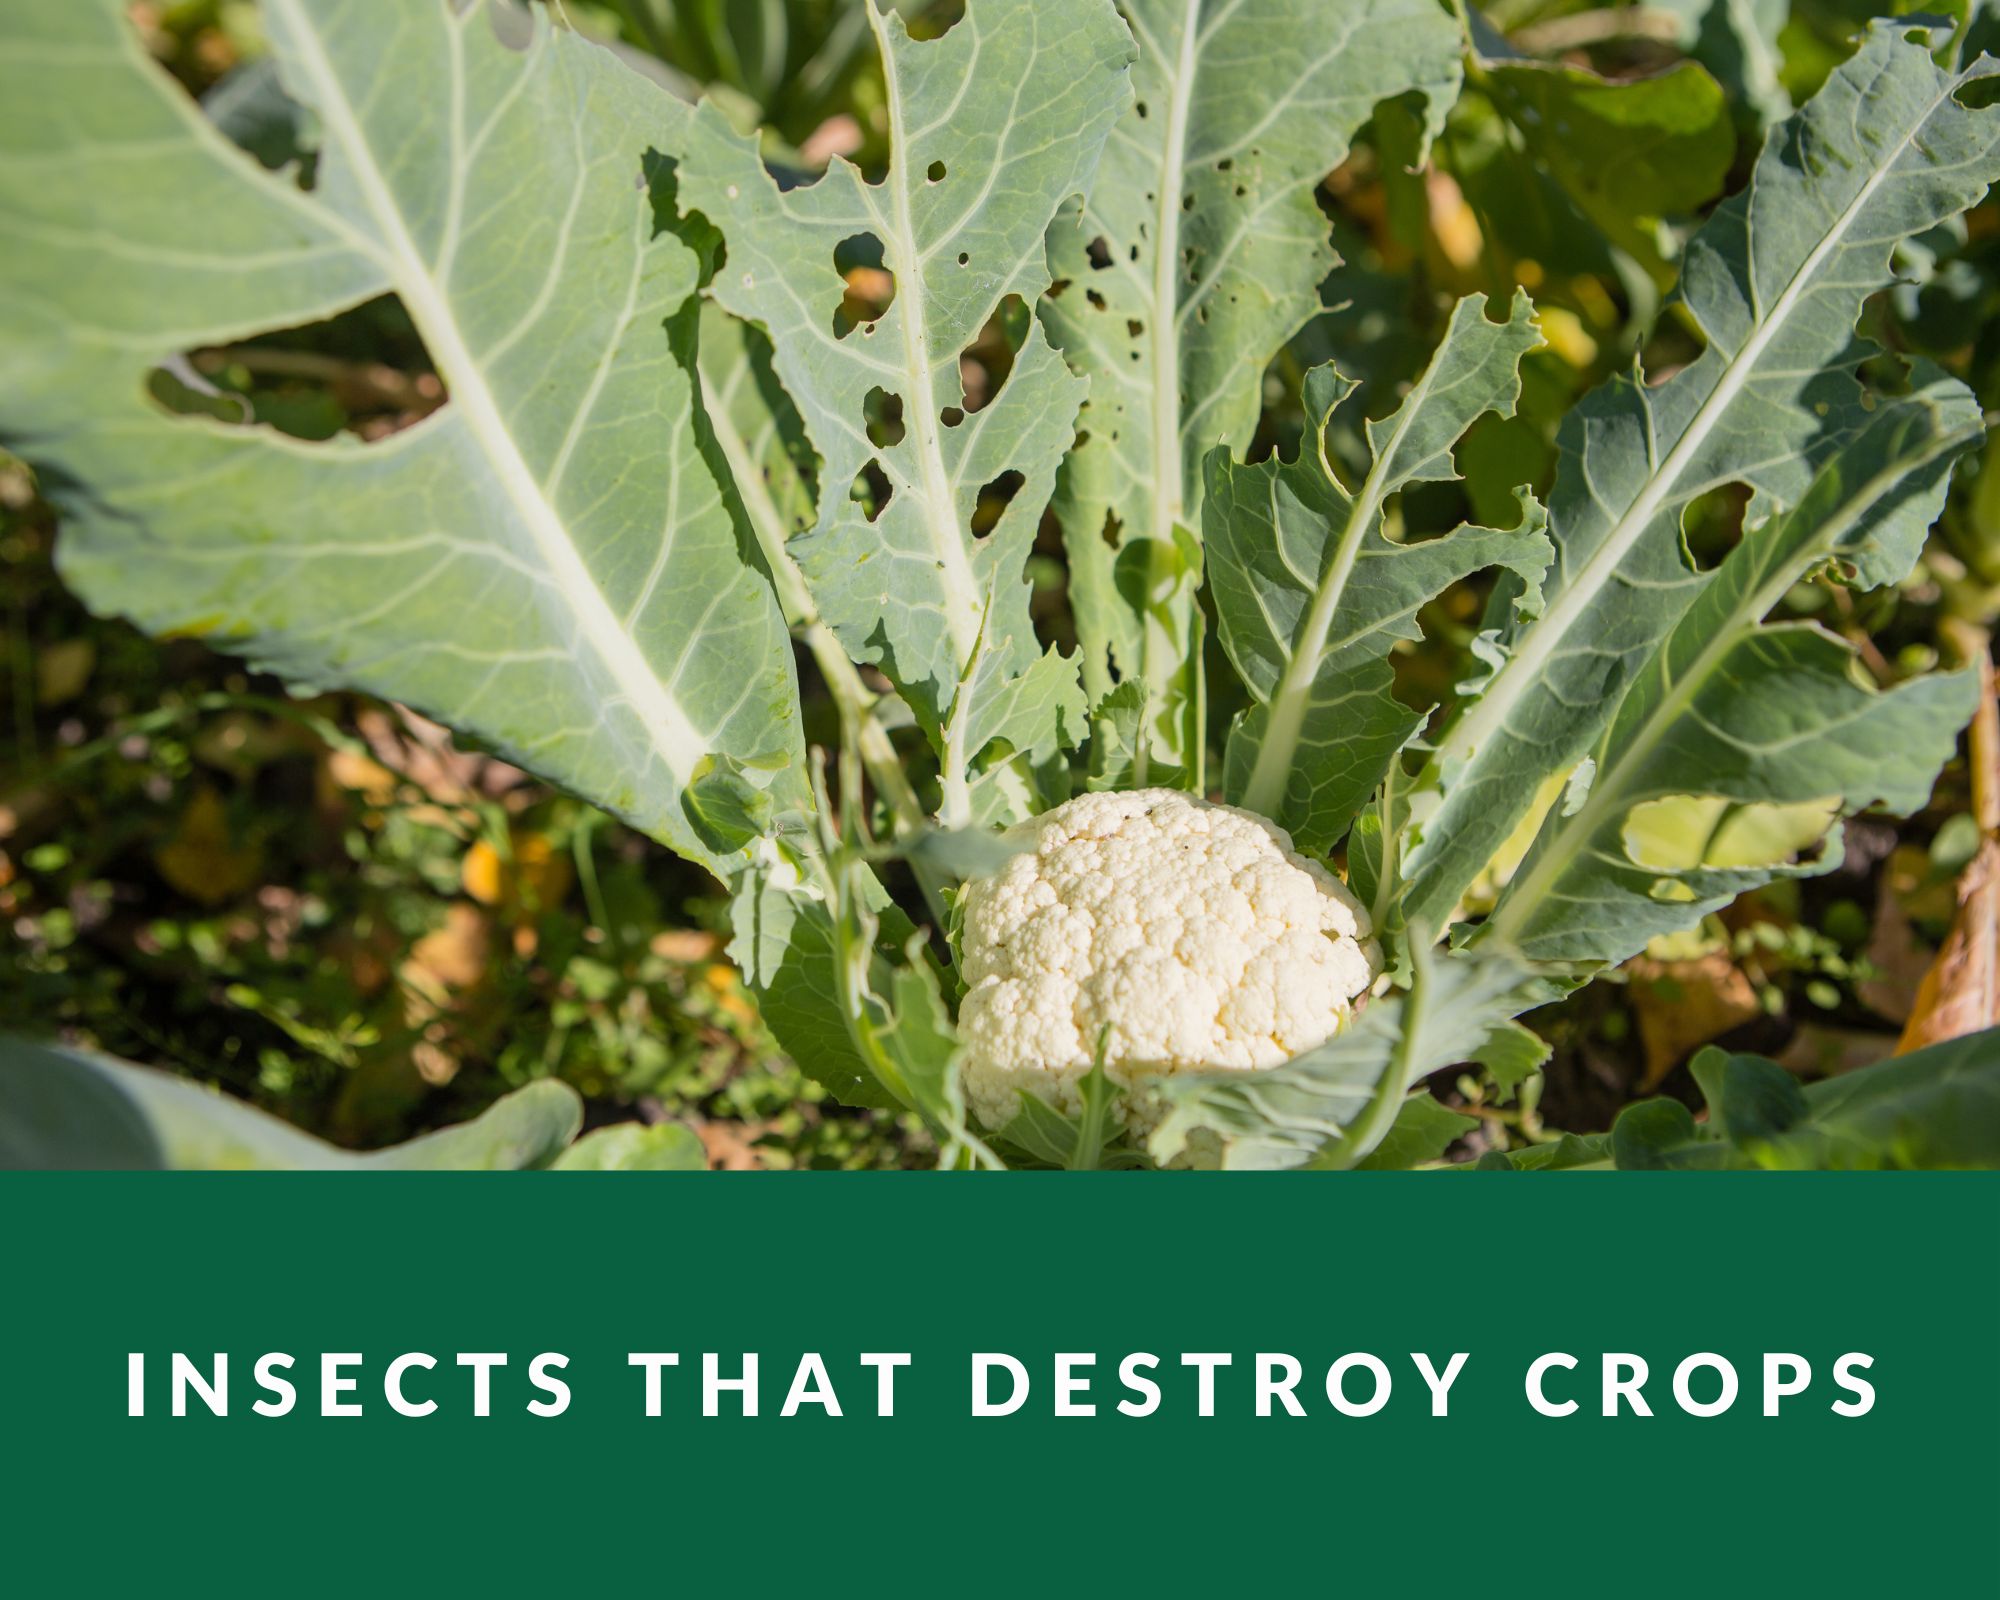 Insects that destroy crops